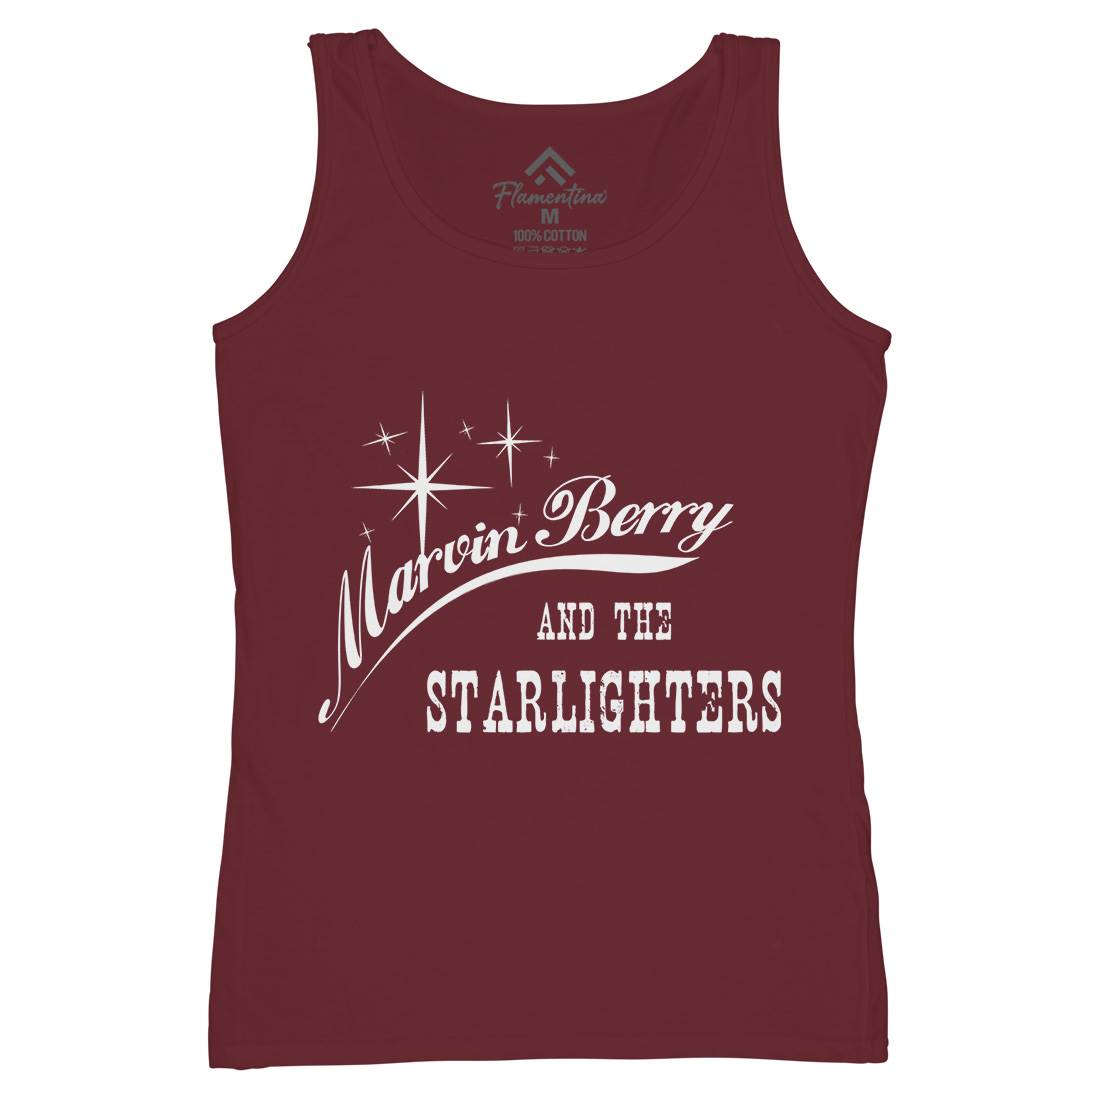 Marvin Berry And The Starlighters Womens Organic Tank Top Vest Music D152